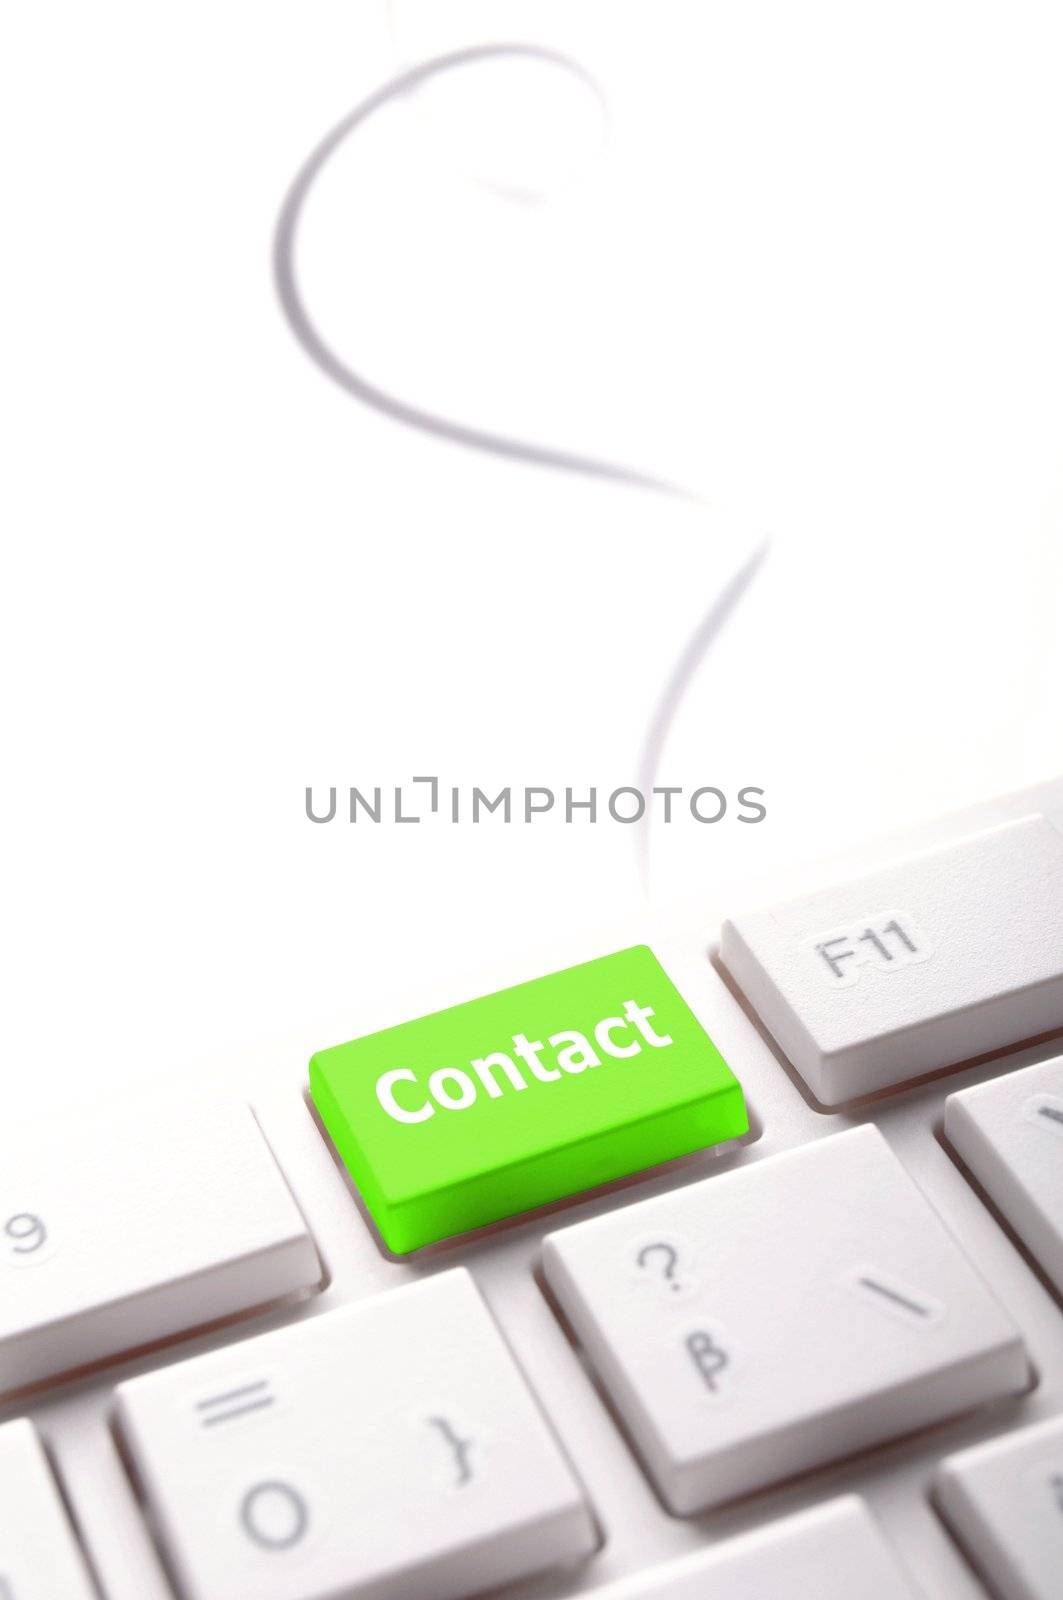 contact us word on computer keyboard key showing business communication